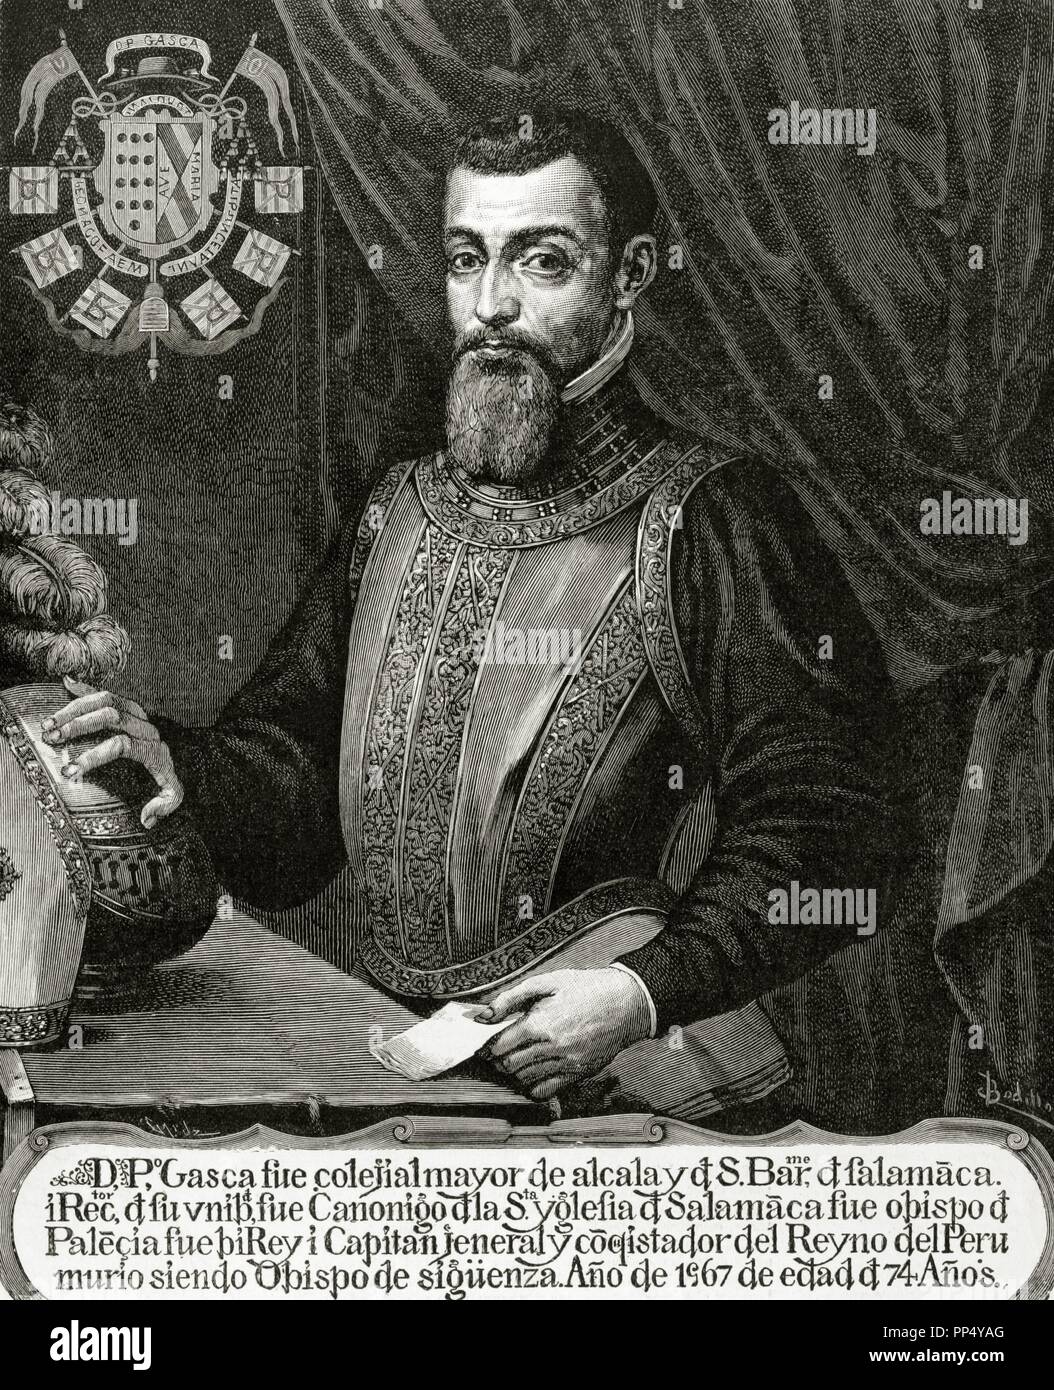 Pedro de La Gasca, The Peacemaker (1493-1567). Spanish priest, politician and military. Knight of the Order of Santiago. Engraving by Capuz. The Spanish and American Illustration, 1892. Stock Photo